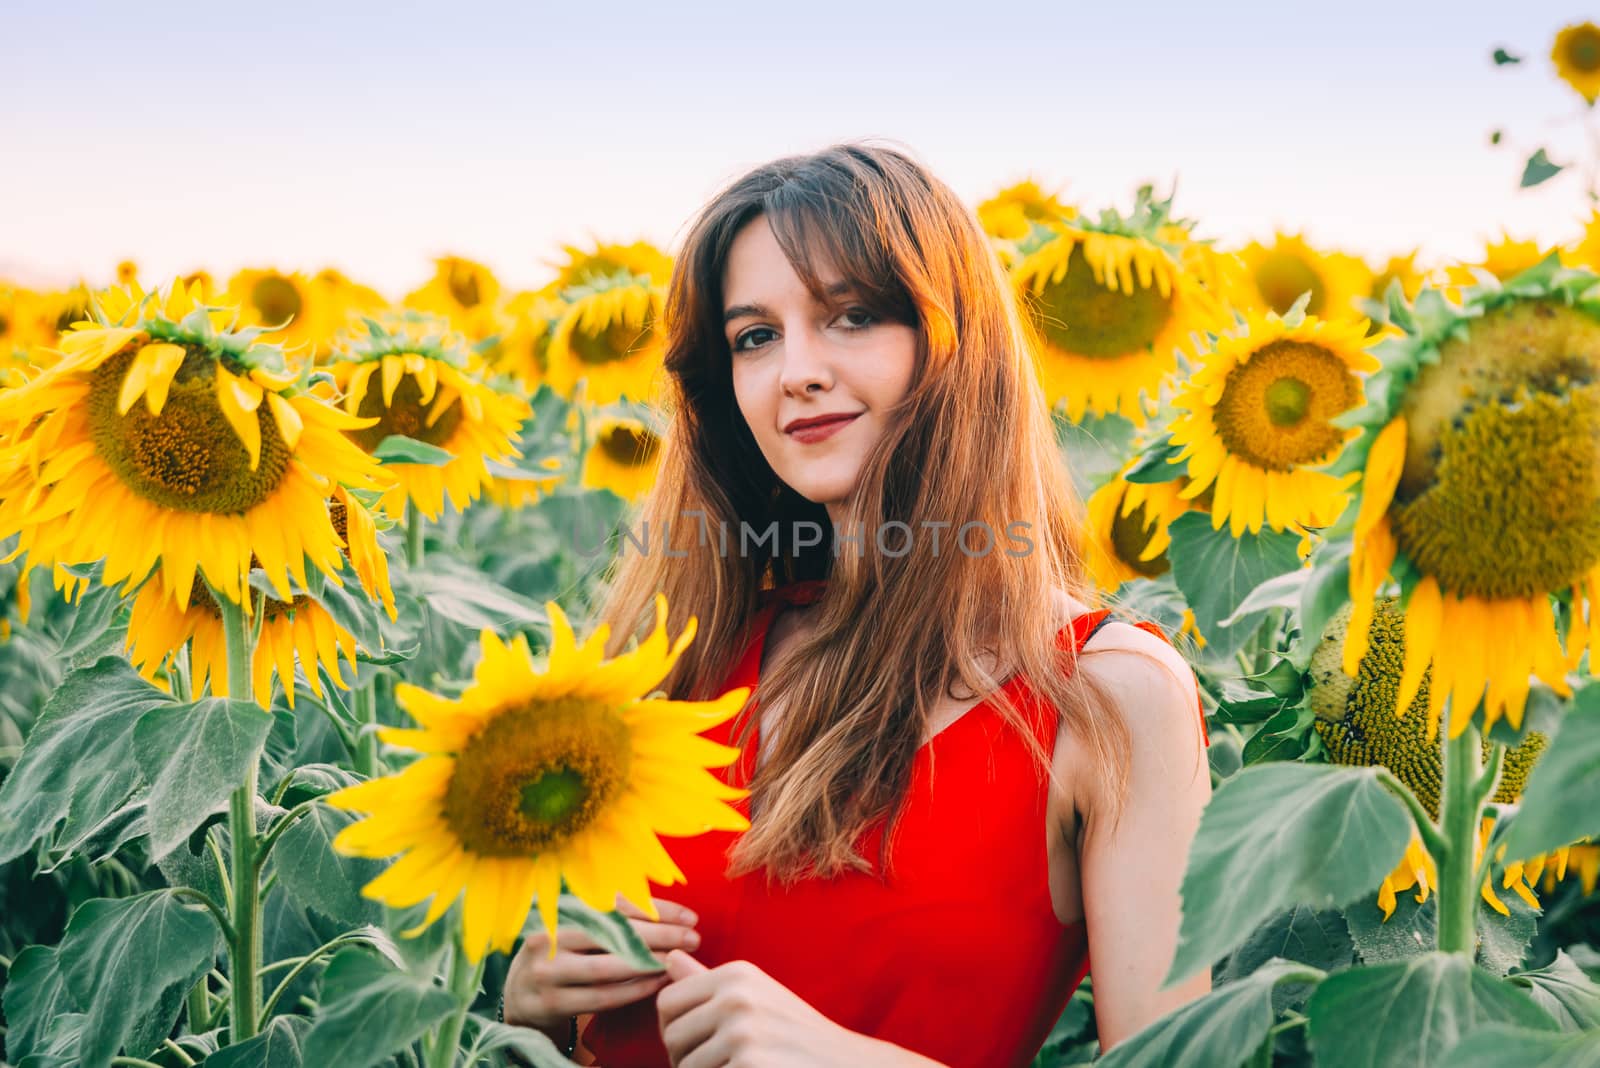 woman with red dress in sunflowers field.